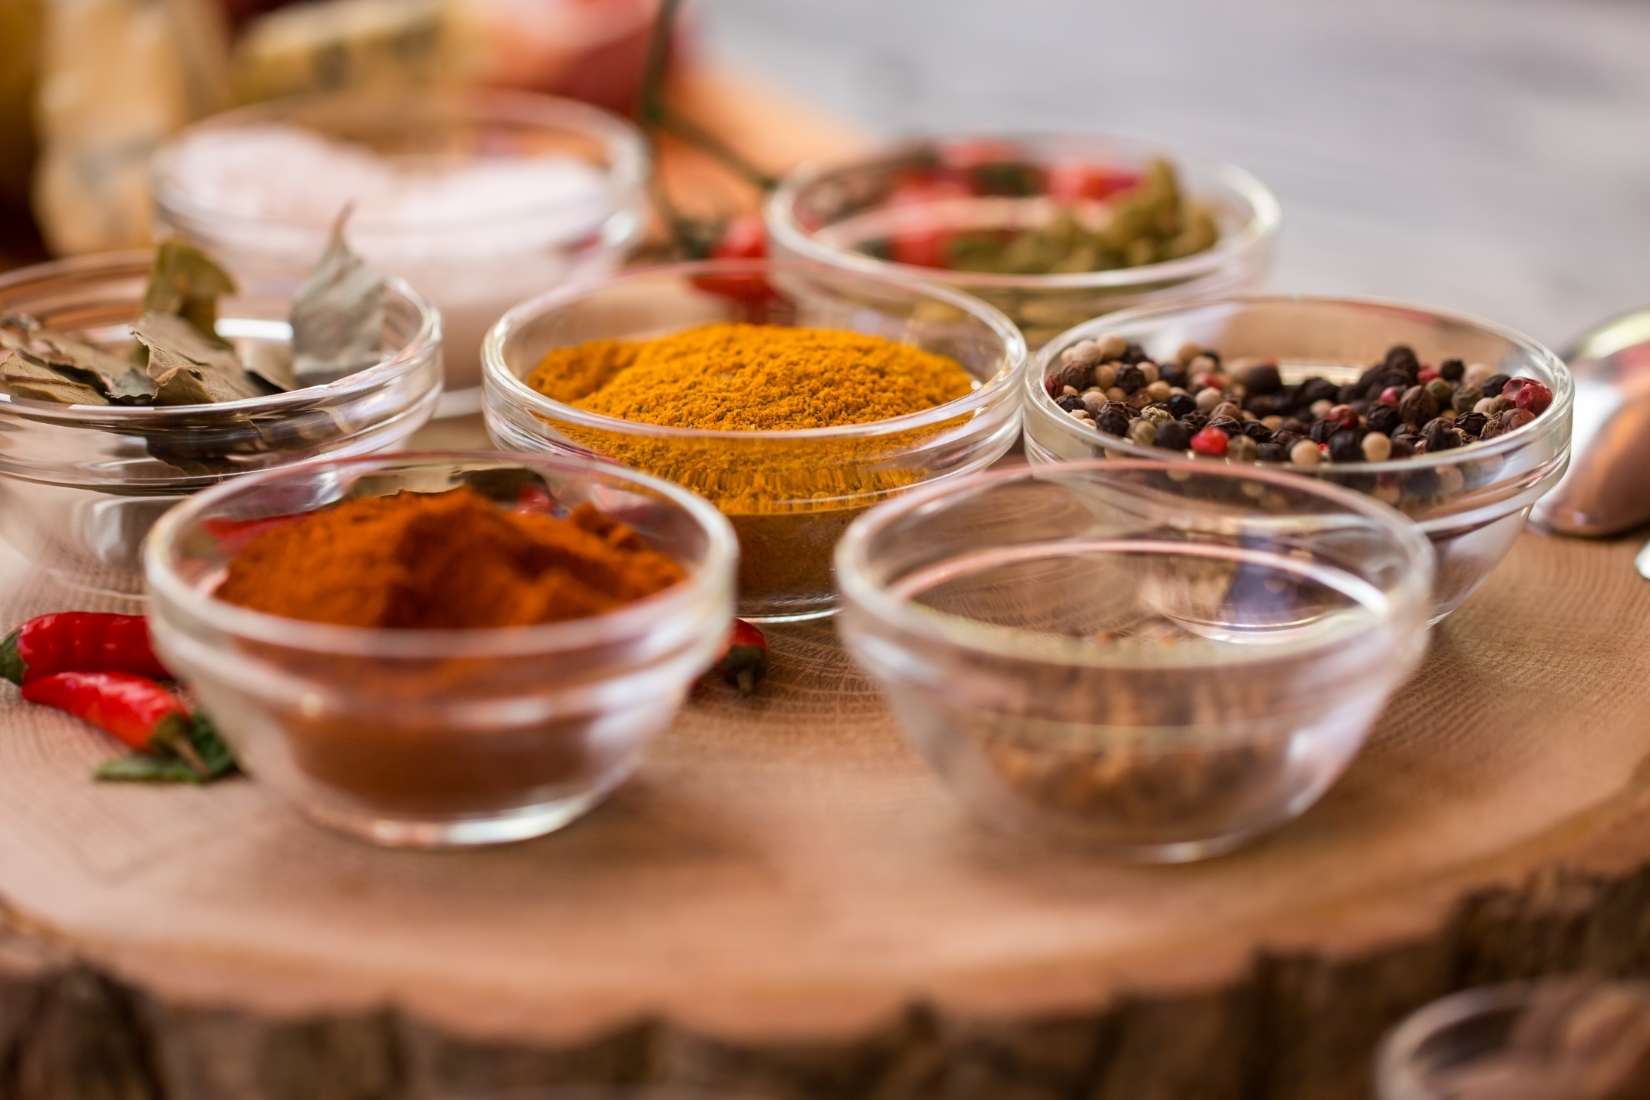 Variety of spices in small glass bowls